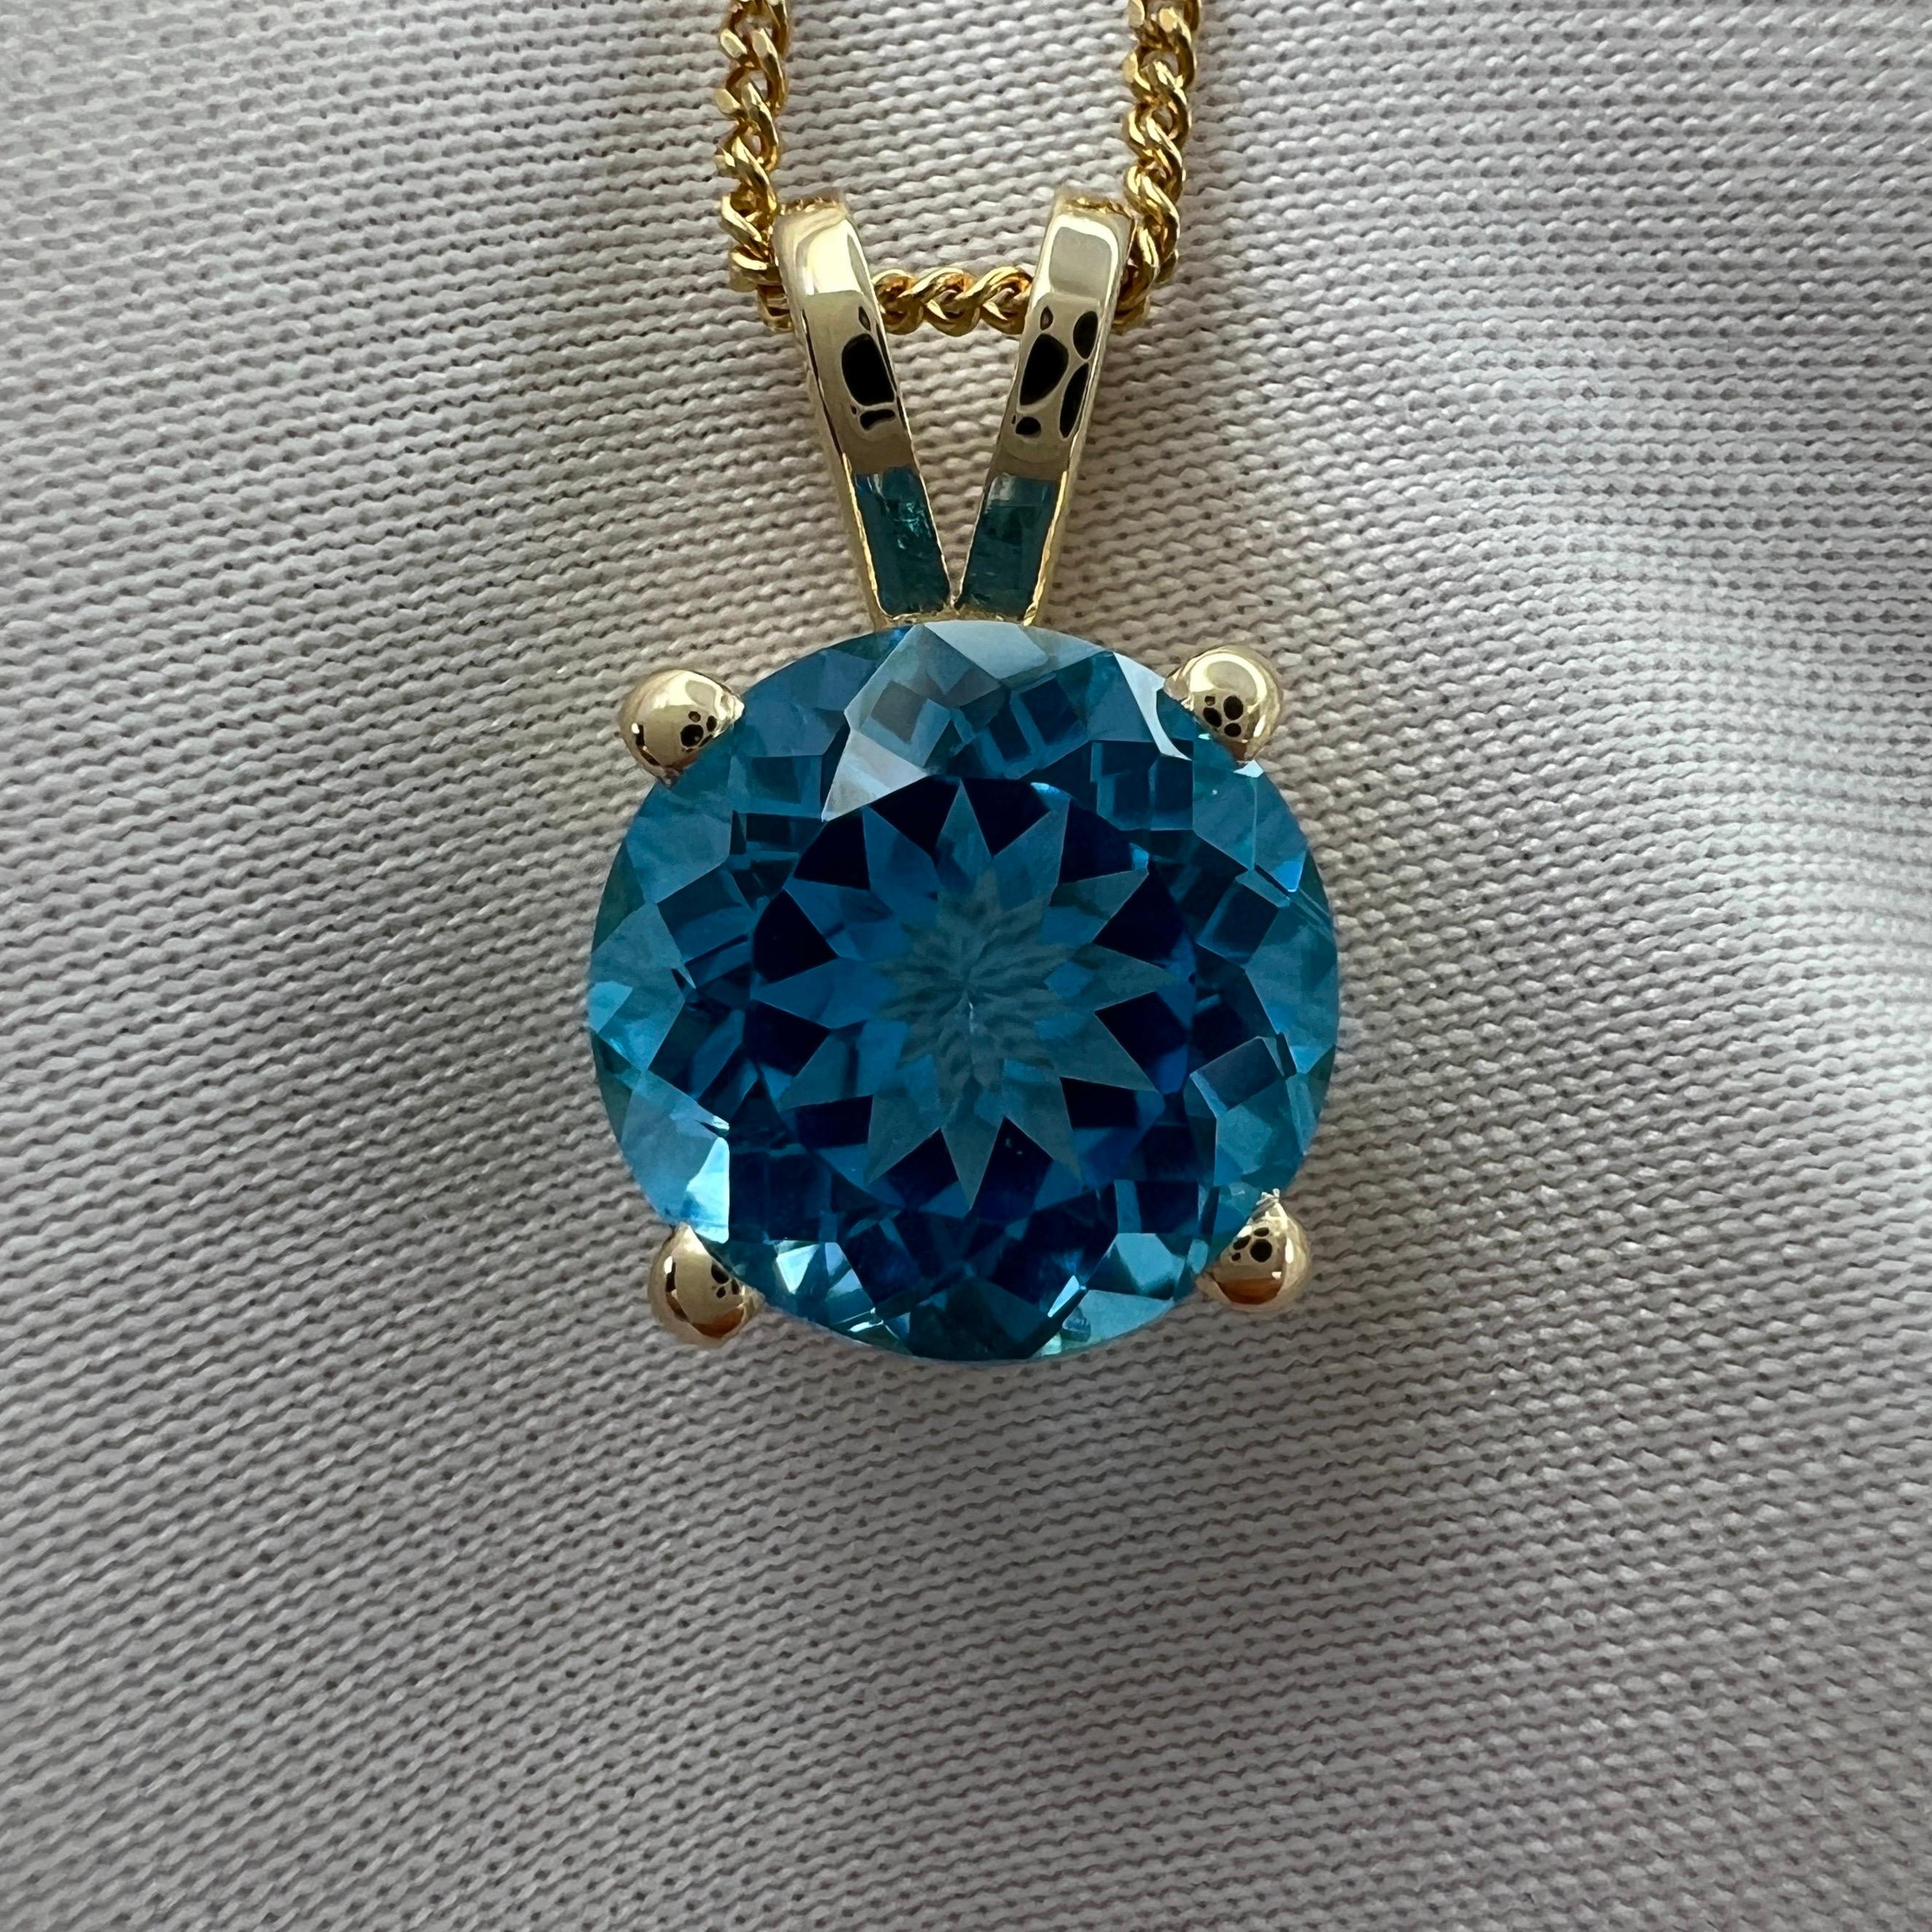 Fine Swiss Blue Topaz Round Cut Yellow Gold Solitaire Pendant Necklace.

Stunning blue topaz with a vivid 'Swiss' blue colour and excellent clarity, practically flawless.
Has an excellent round brilliant cut which shows lots of brightness and light